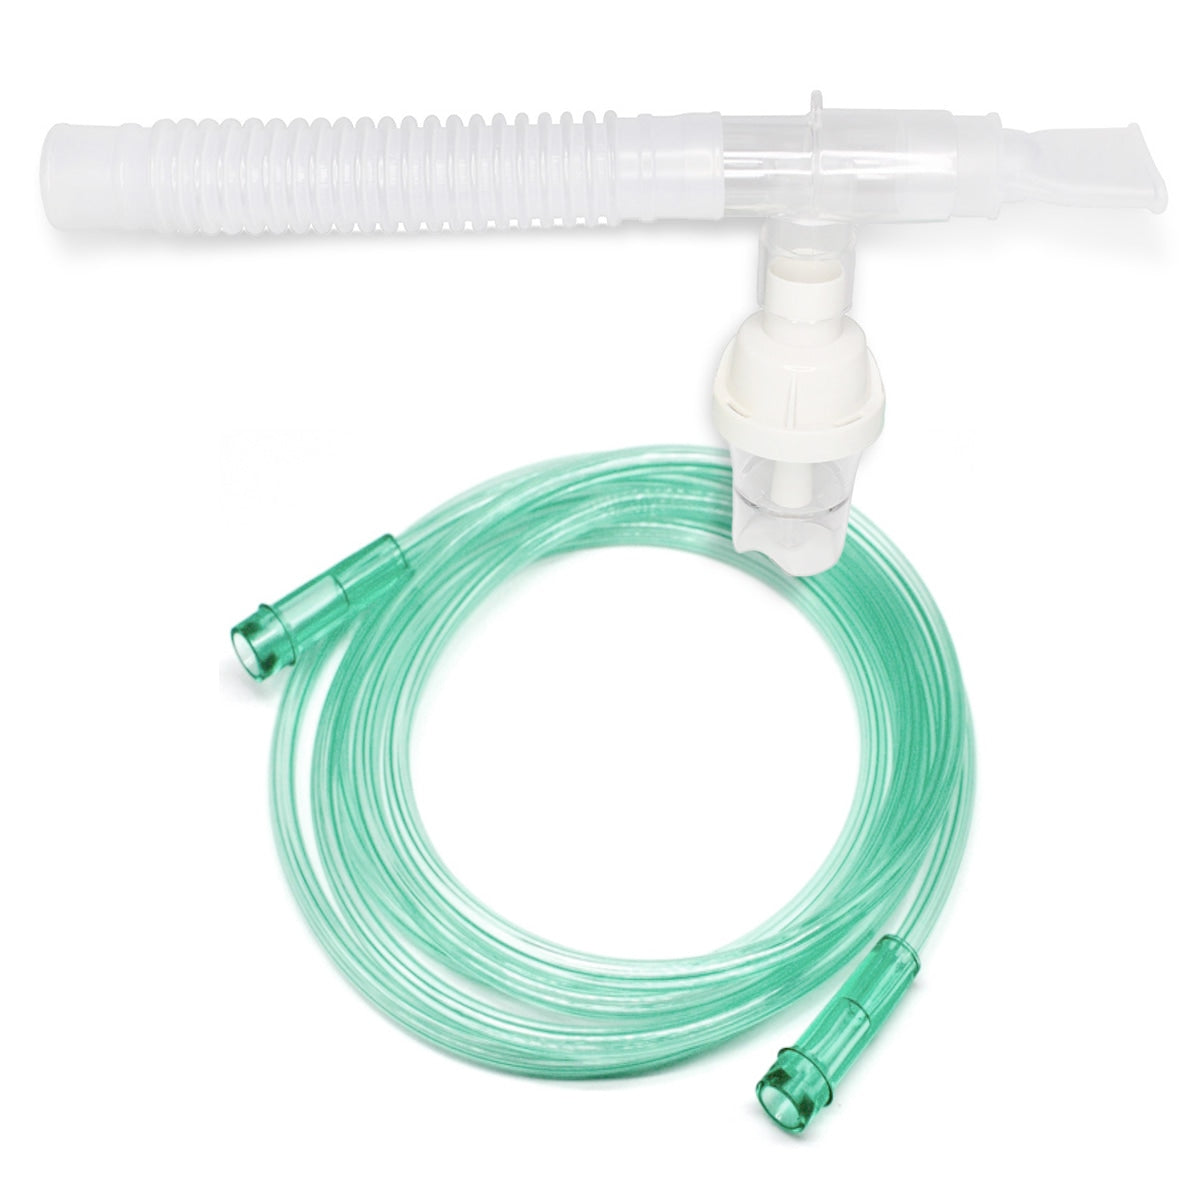 Sunset Reusable Nebulizer Kit with T-Piece & 7 Foot Tubing